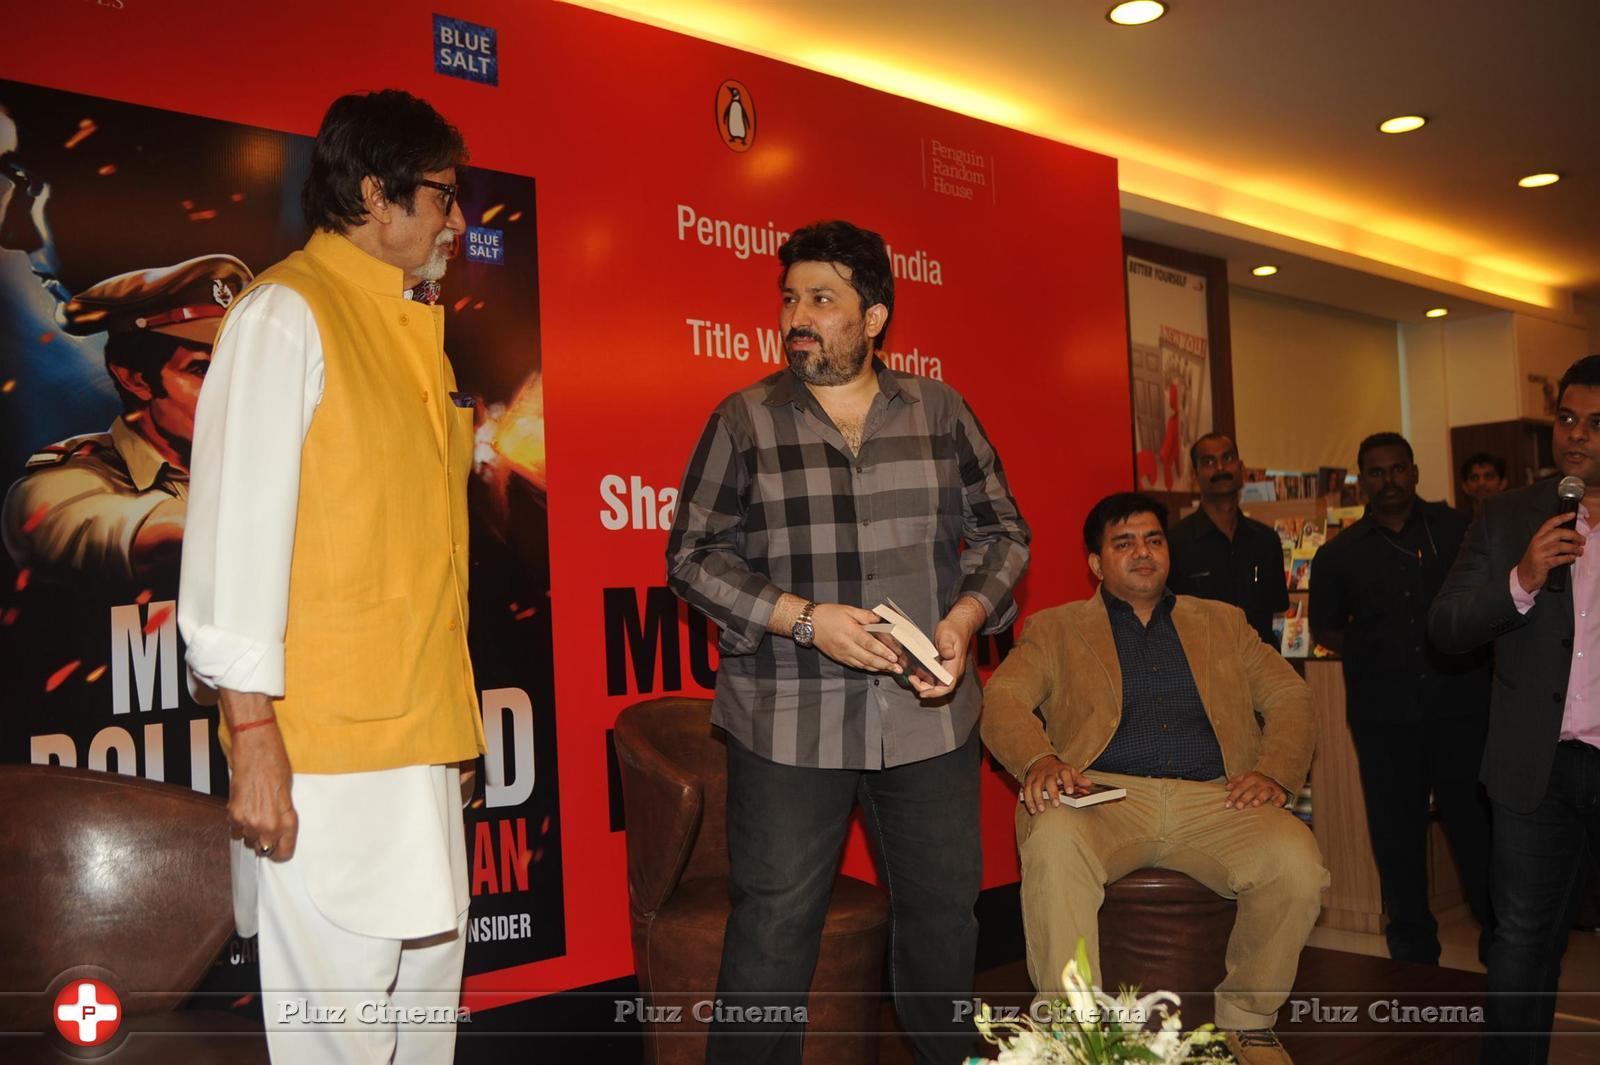 Amitabh Bachchan launches Shadab Amjad Khan's book Murder in Bollywood Photos | Picture 1062805